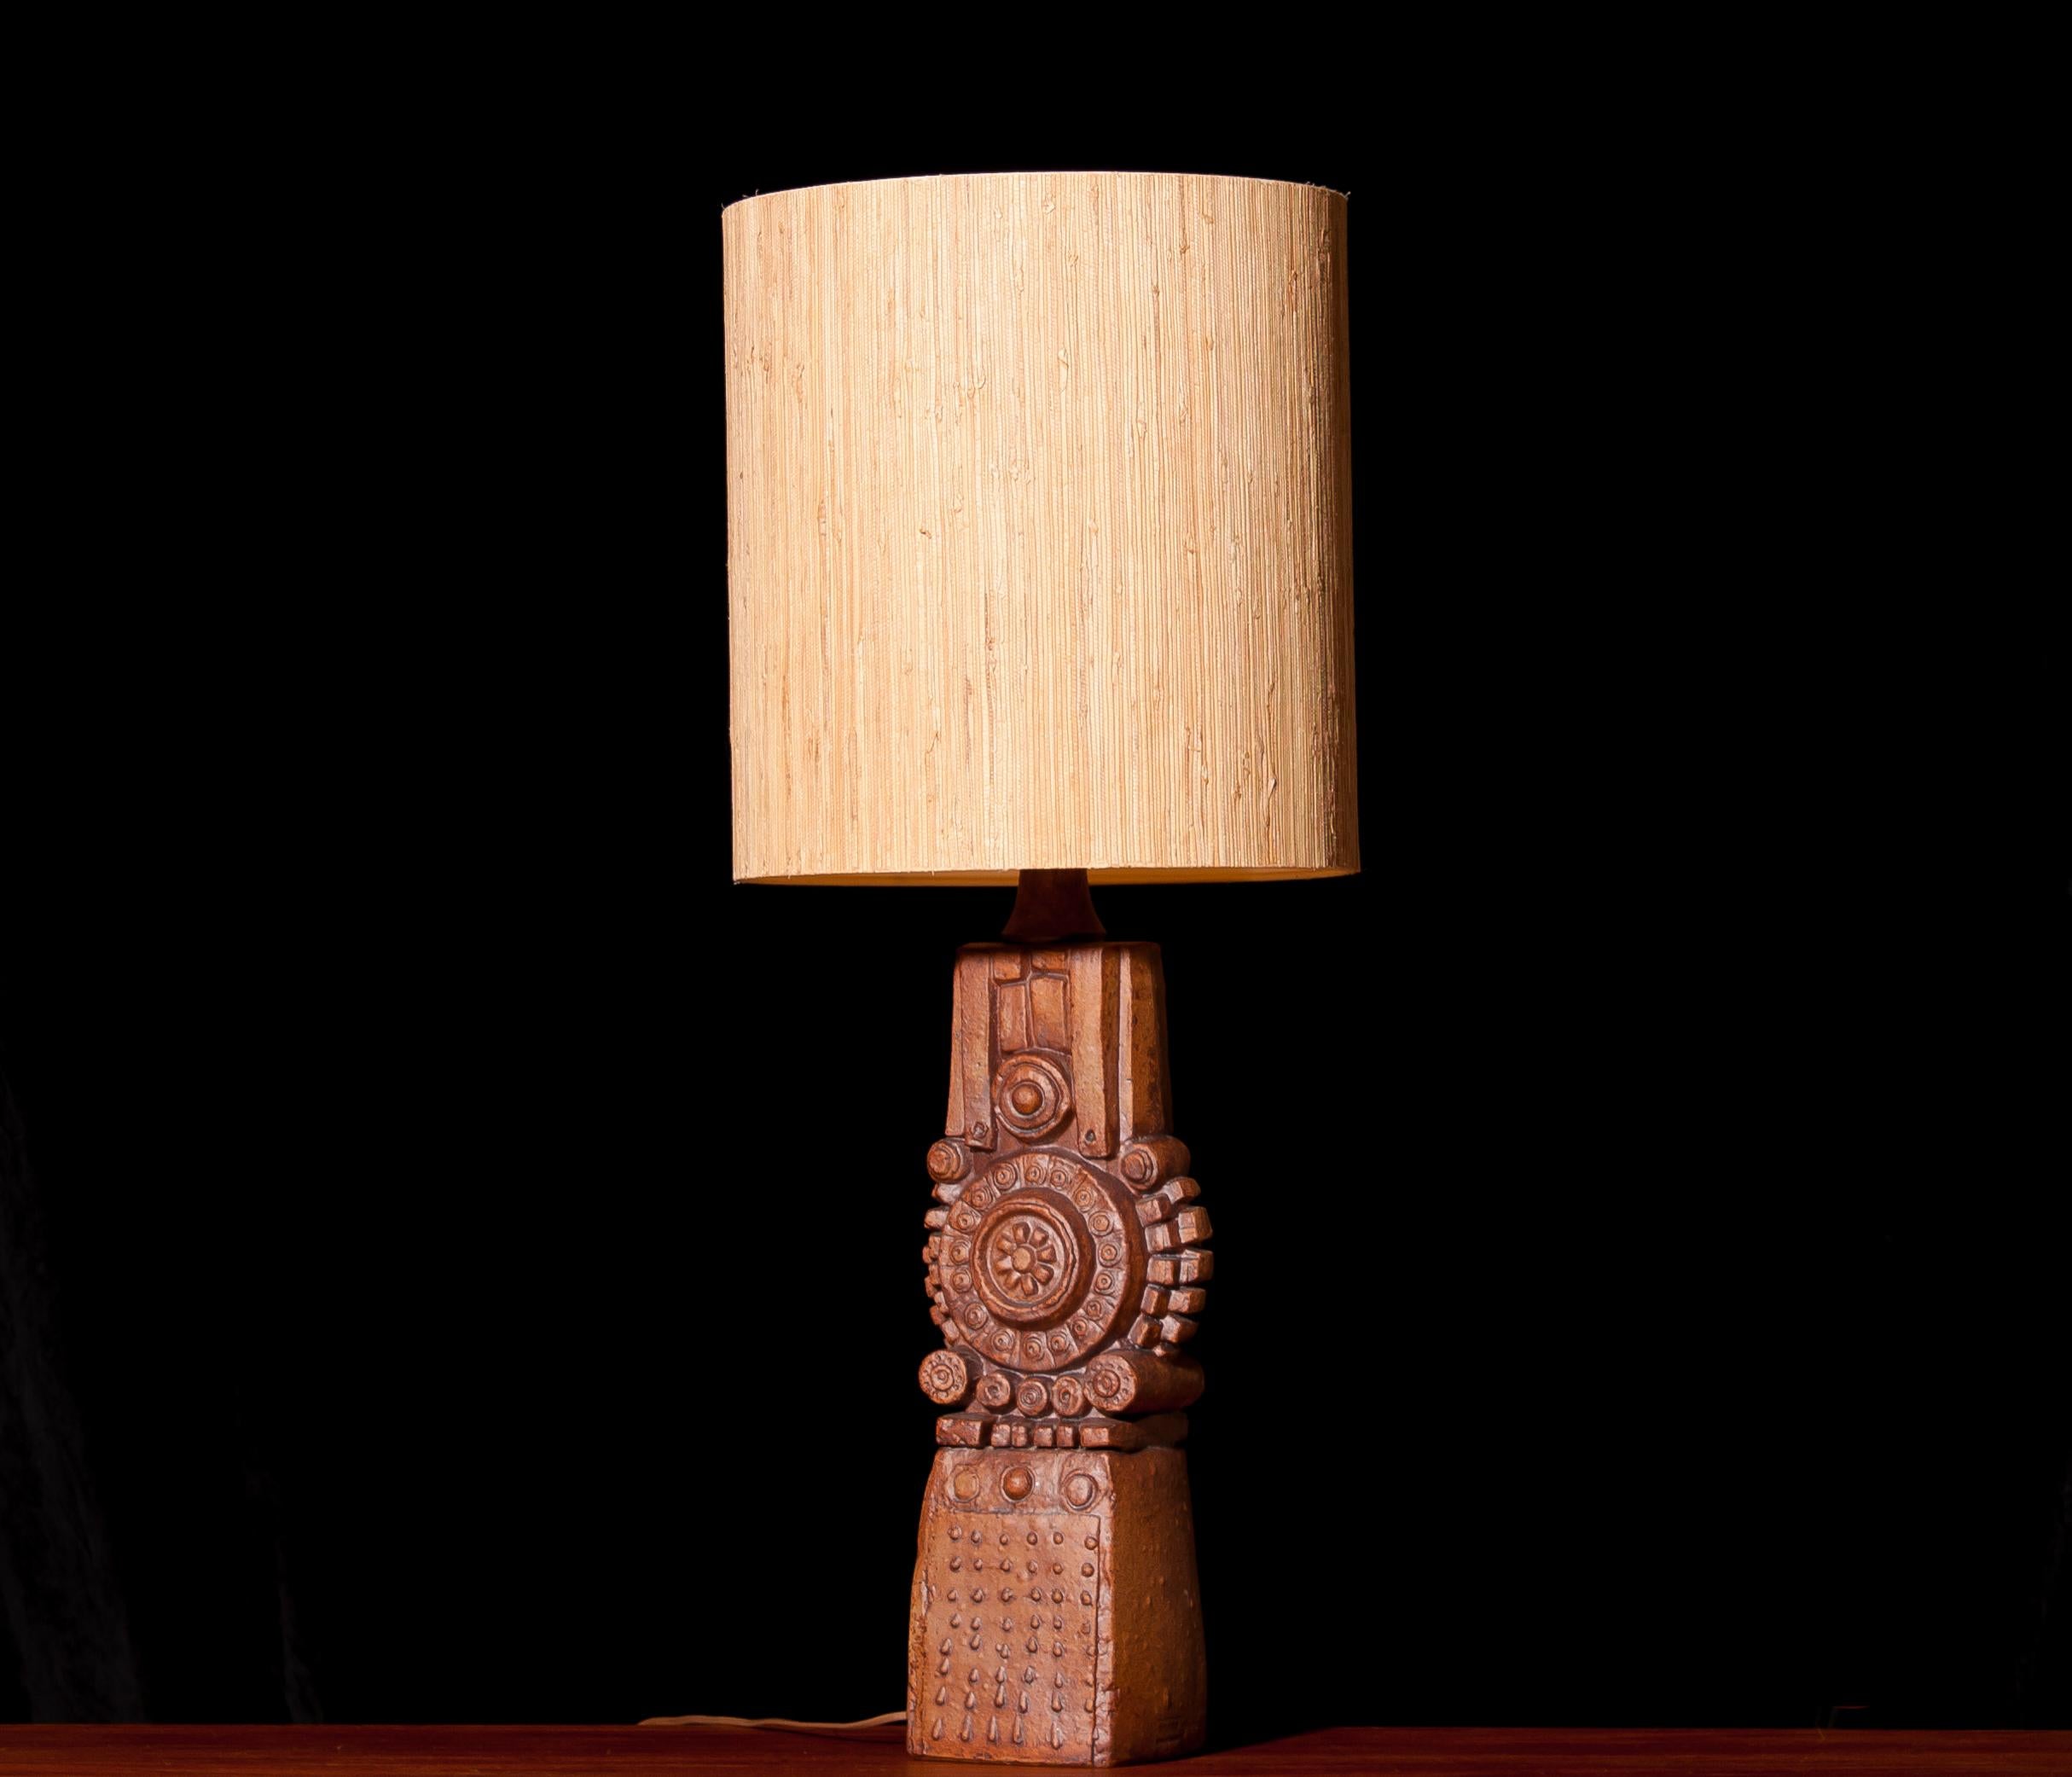 Very beautiful table lamp made by Bernard Rooke.
This wonderful lamp is made of glazed ceramic.
Inscribed by Bernard Rooke.
It is in excellent condition.
Period 1970s
Dimensions: H 88 cm, ø.36 cm.
    